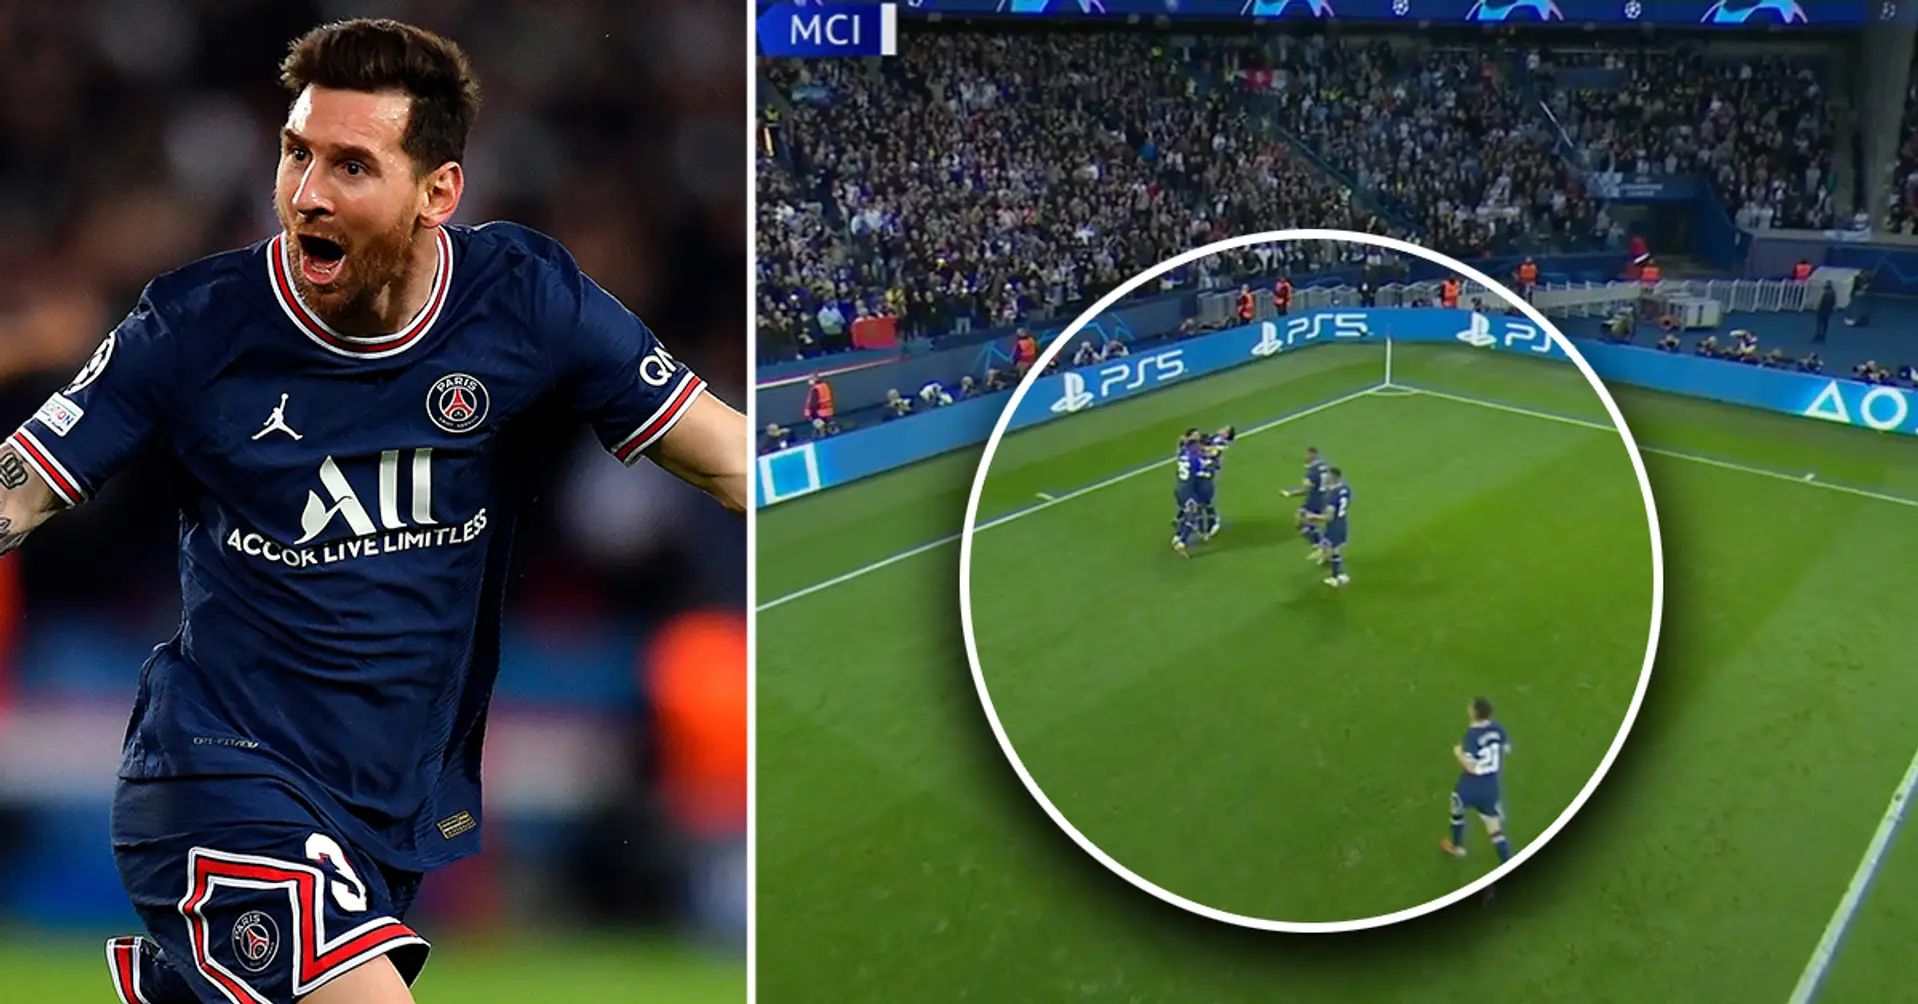 Caught on camera: who was the very first player to celebrate Leo Messi's goal with him